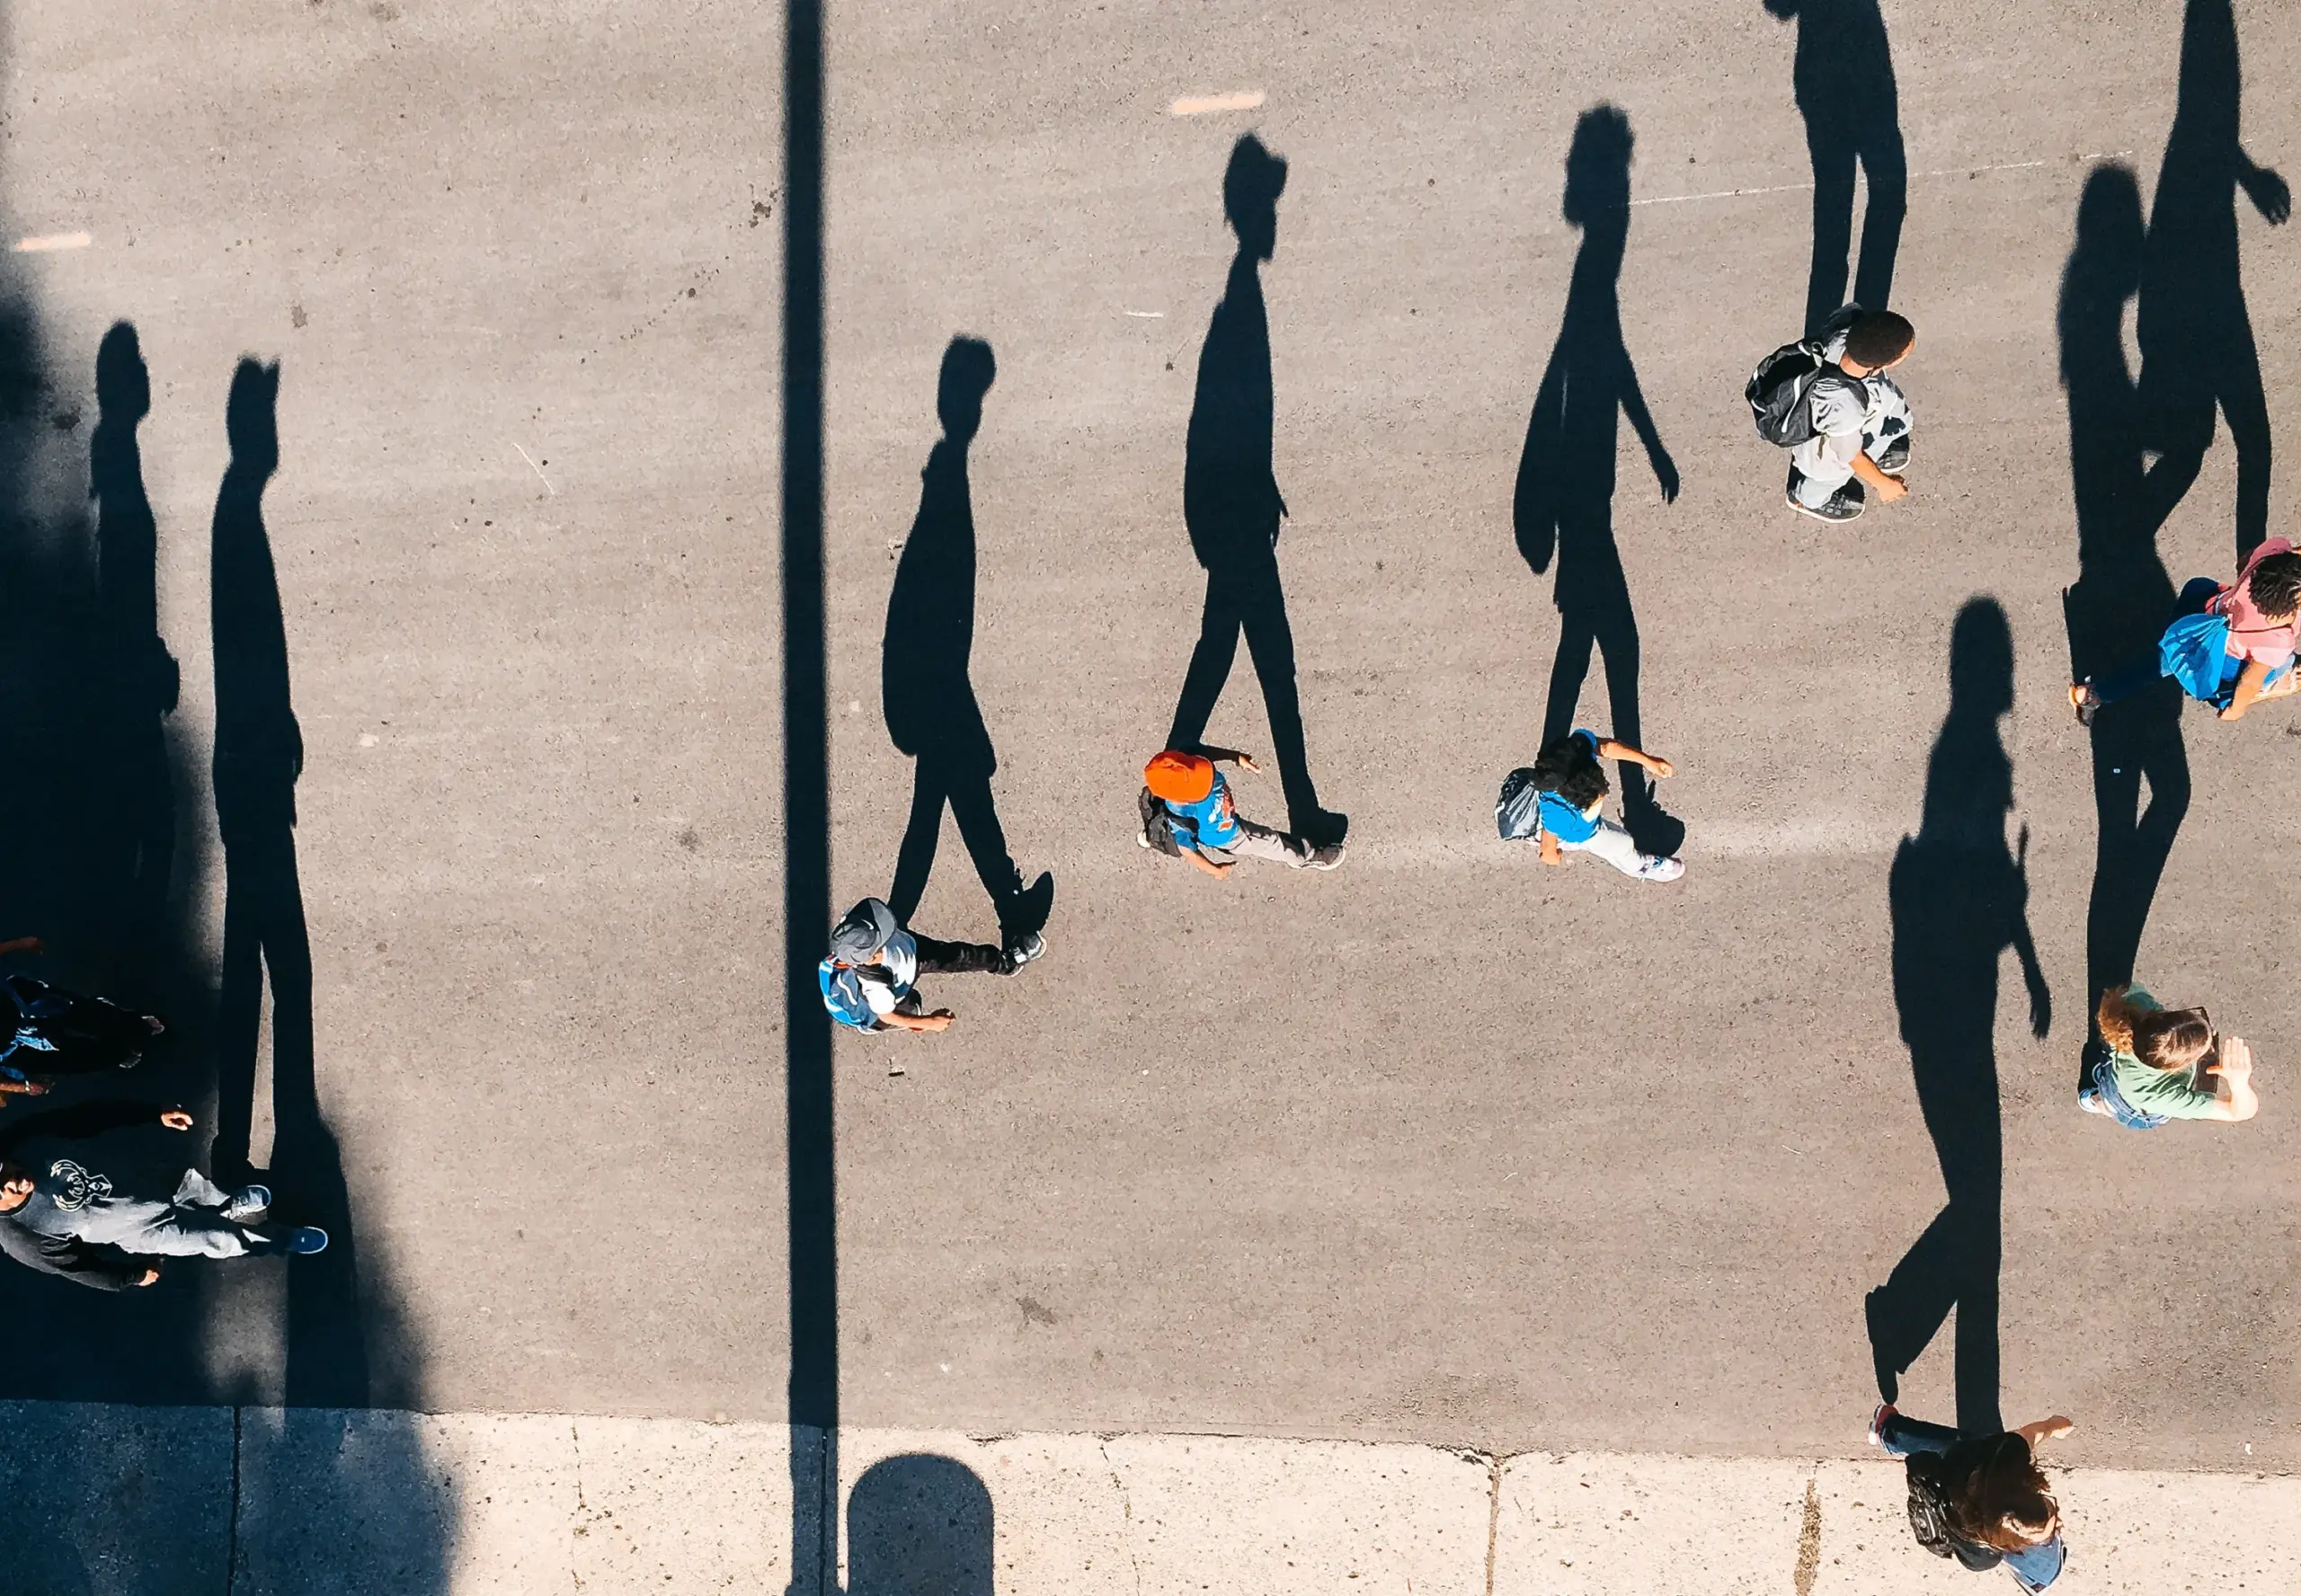 ariel image of men walking with their tall shadows cast beside them